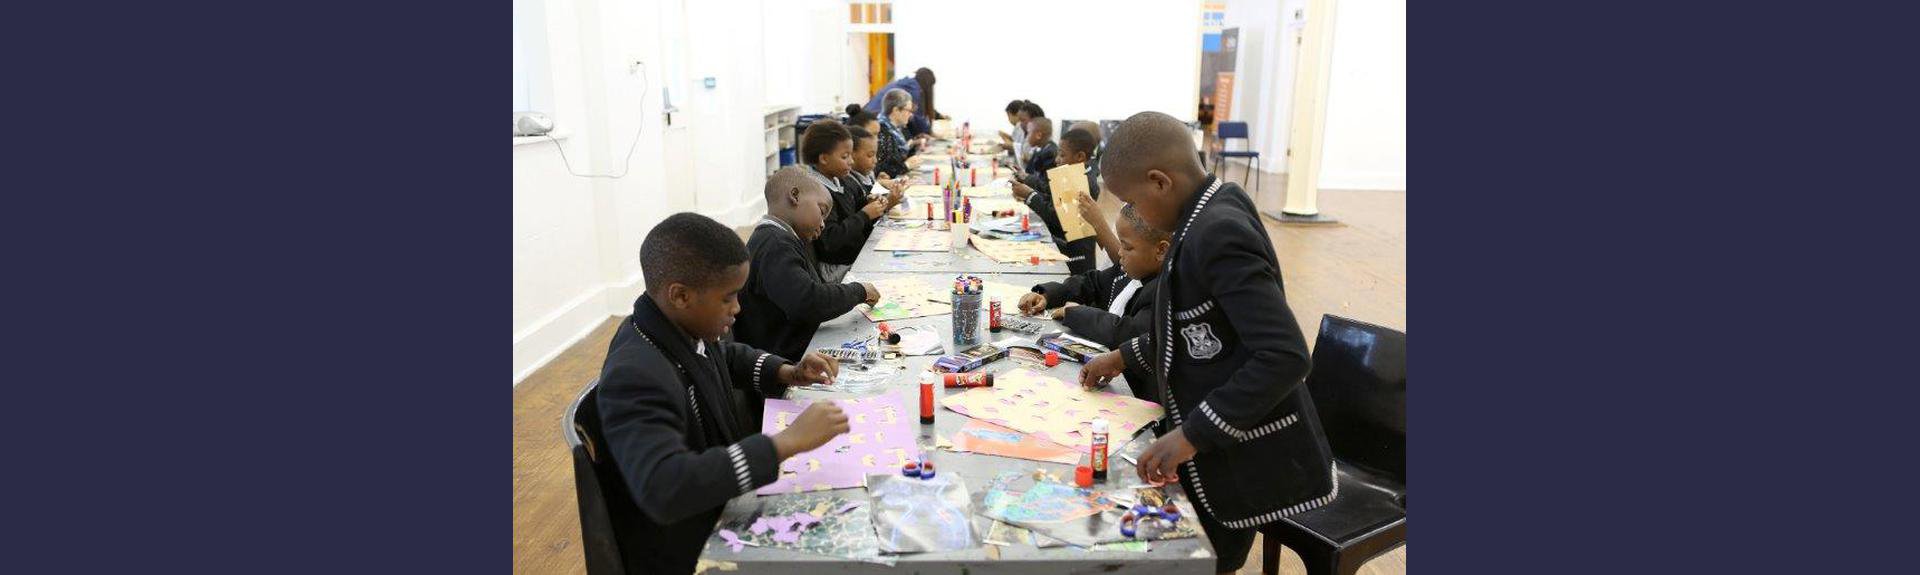 Iziko Museums this June School Holiday 2018